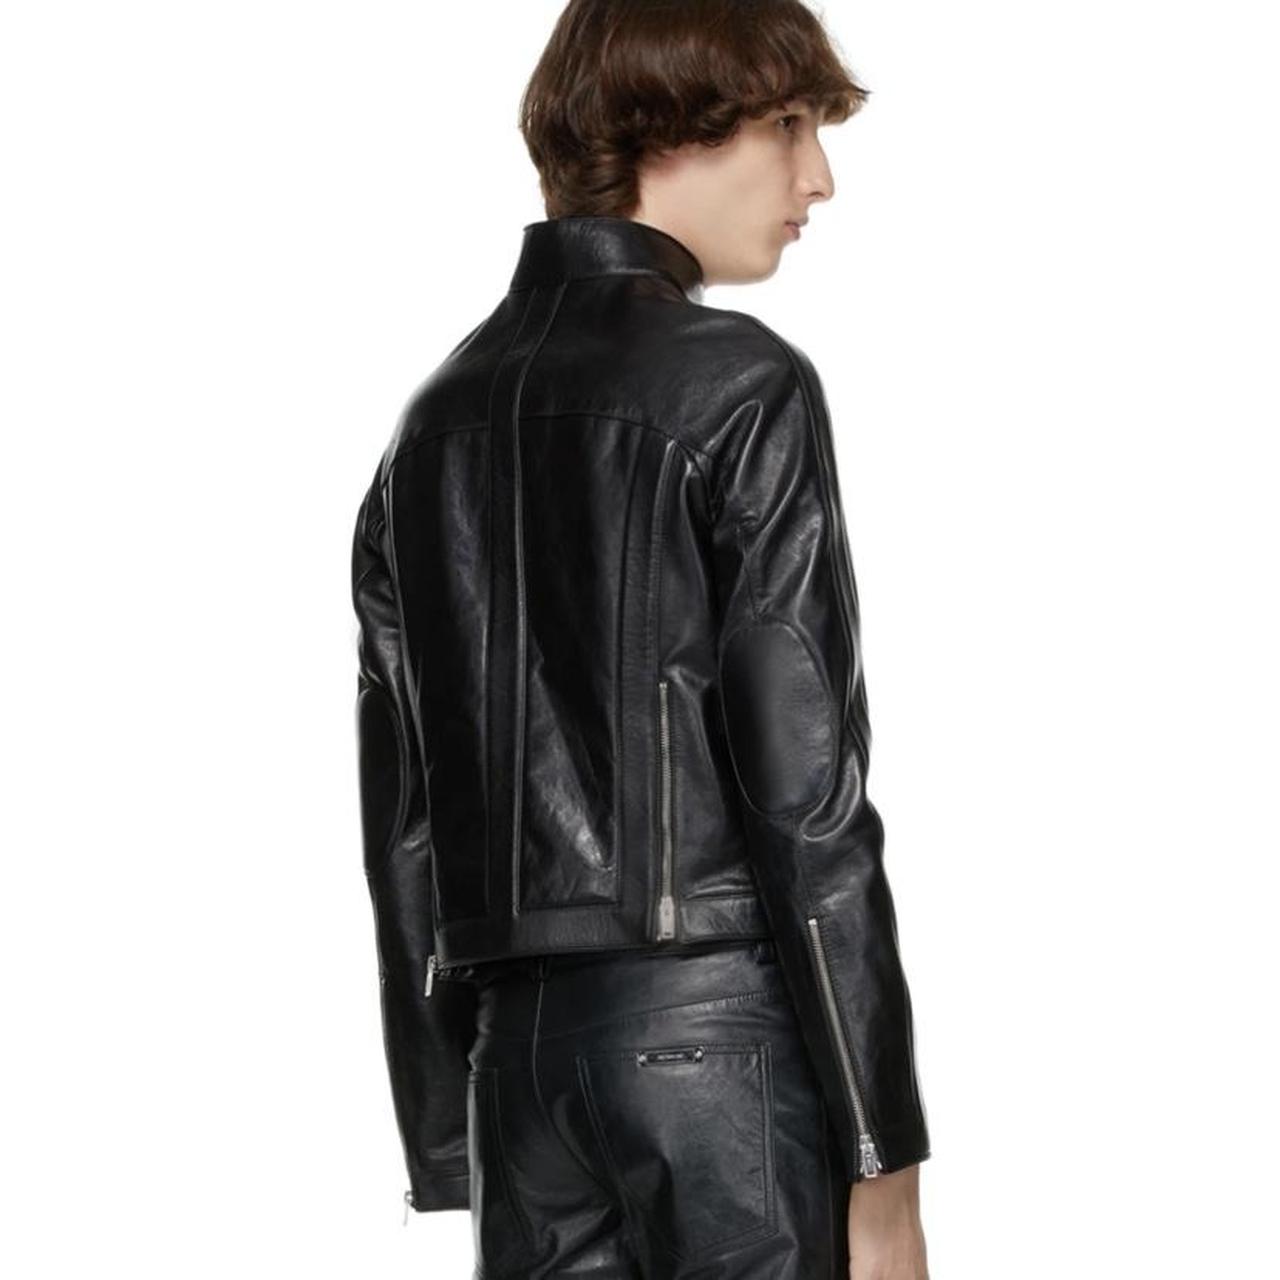 peter do leather jacket perfect condition